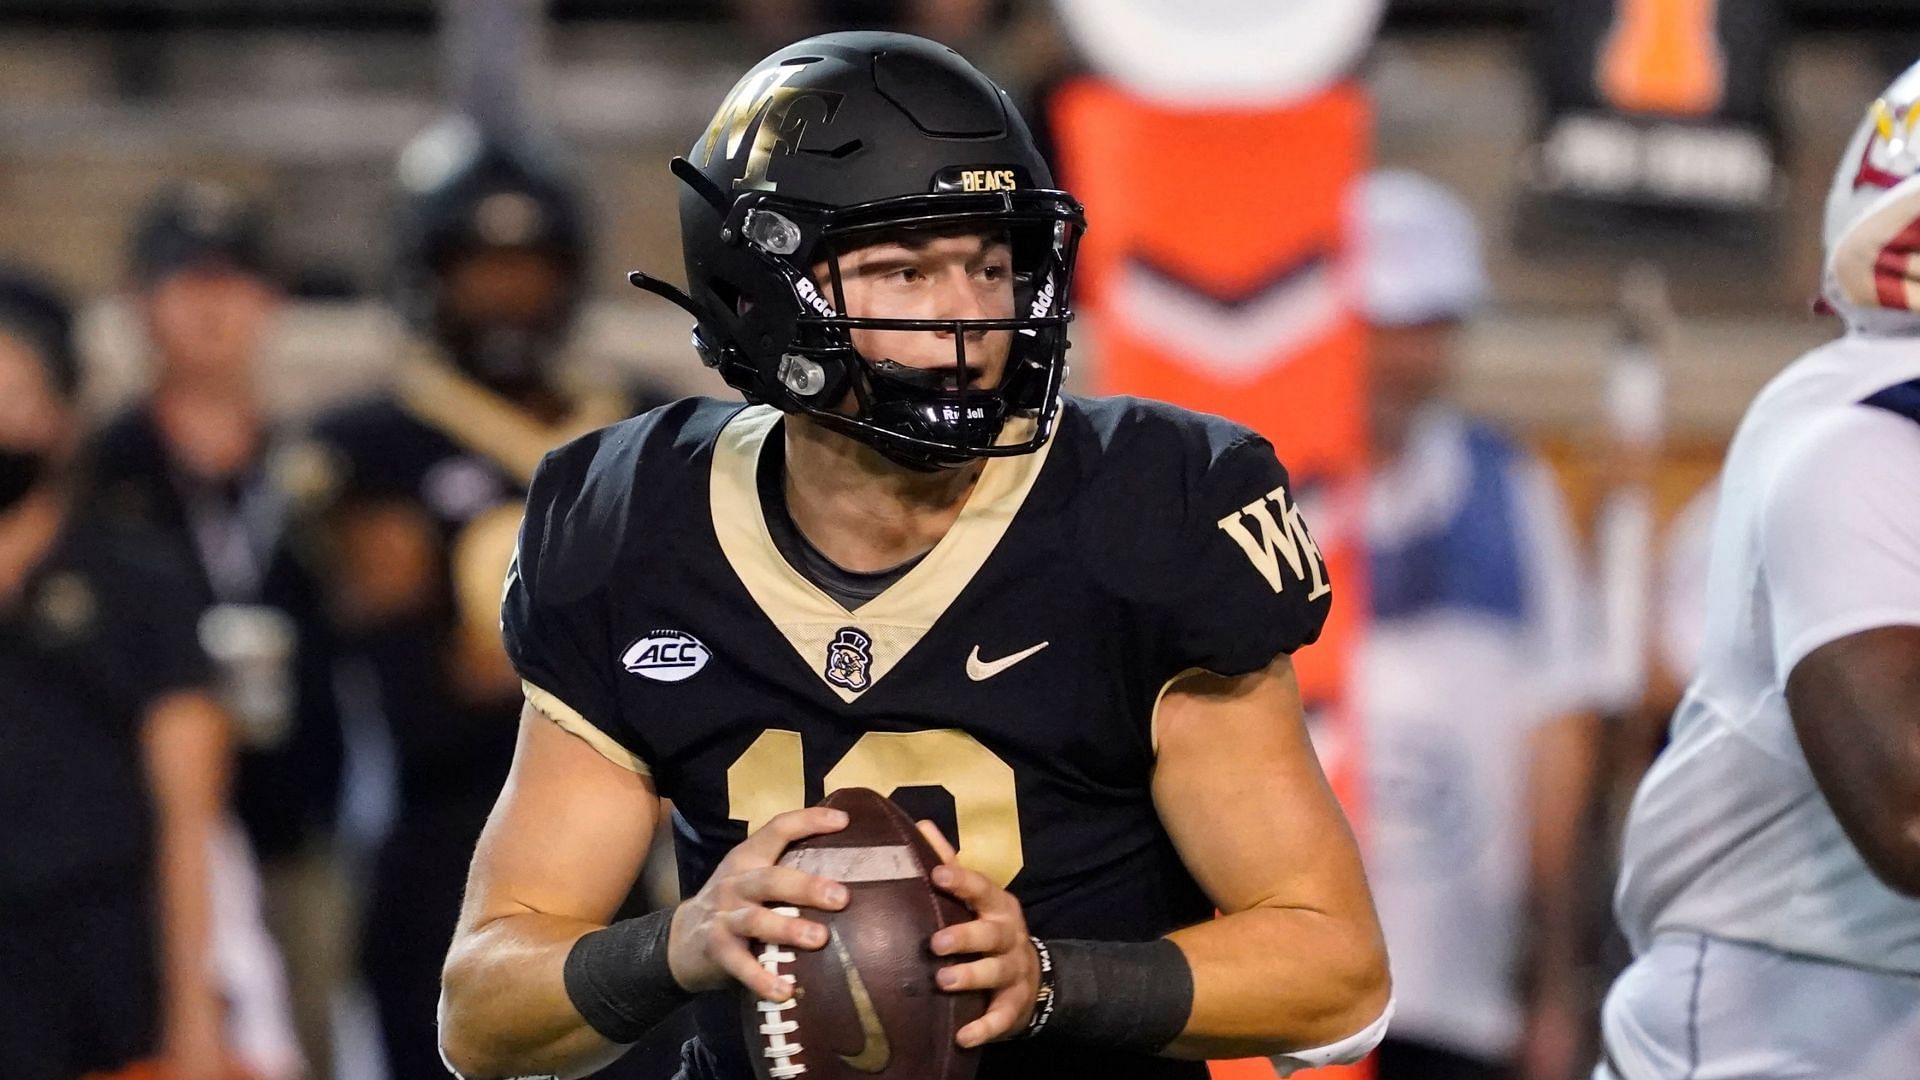 Mitch Griffis - Wake Forest Demon Deacons starting quarterback